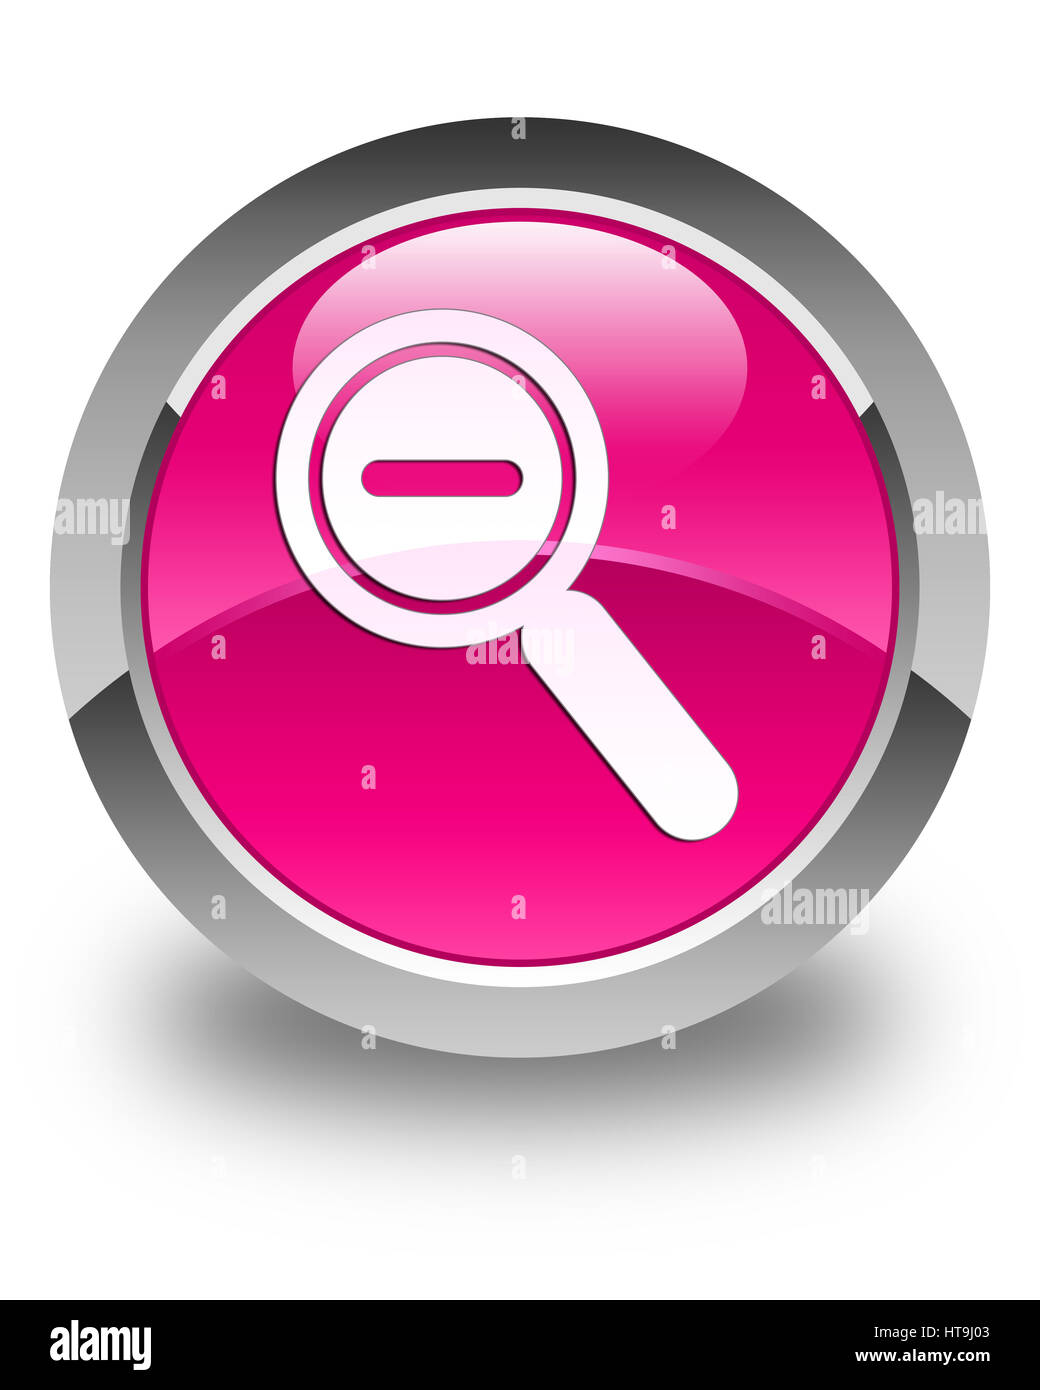 Zoom out icon isolated on glossy pink round button abstract illustration Stock Photo